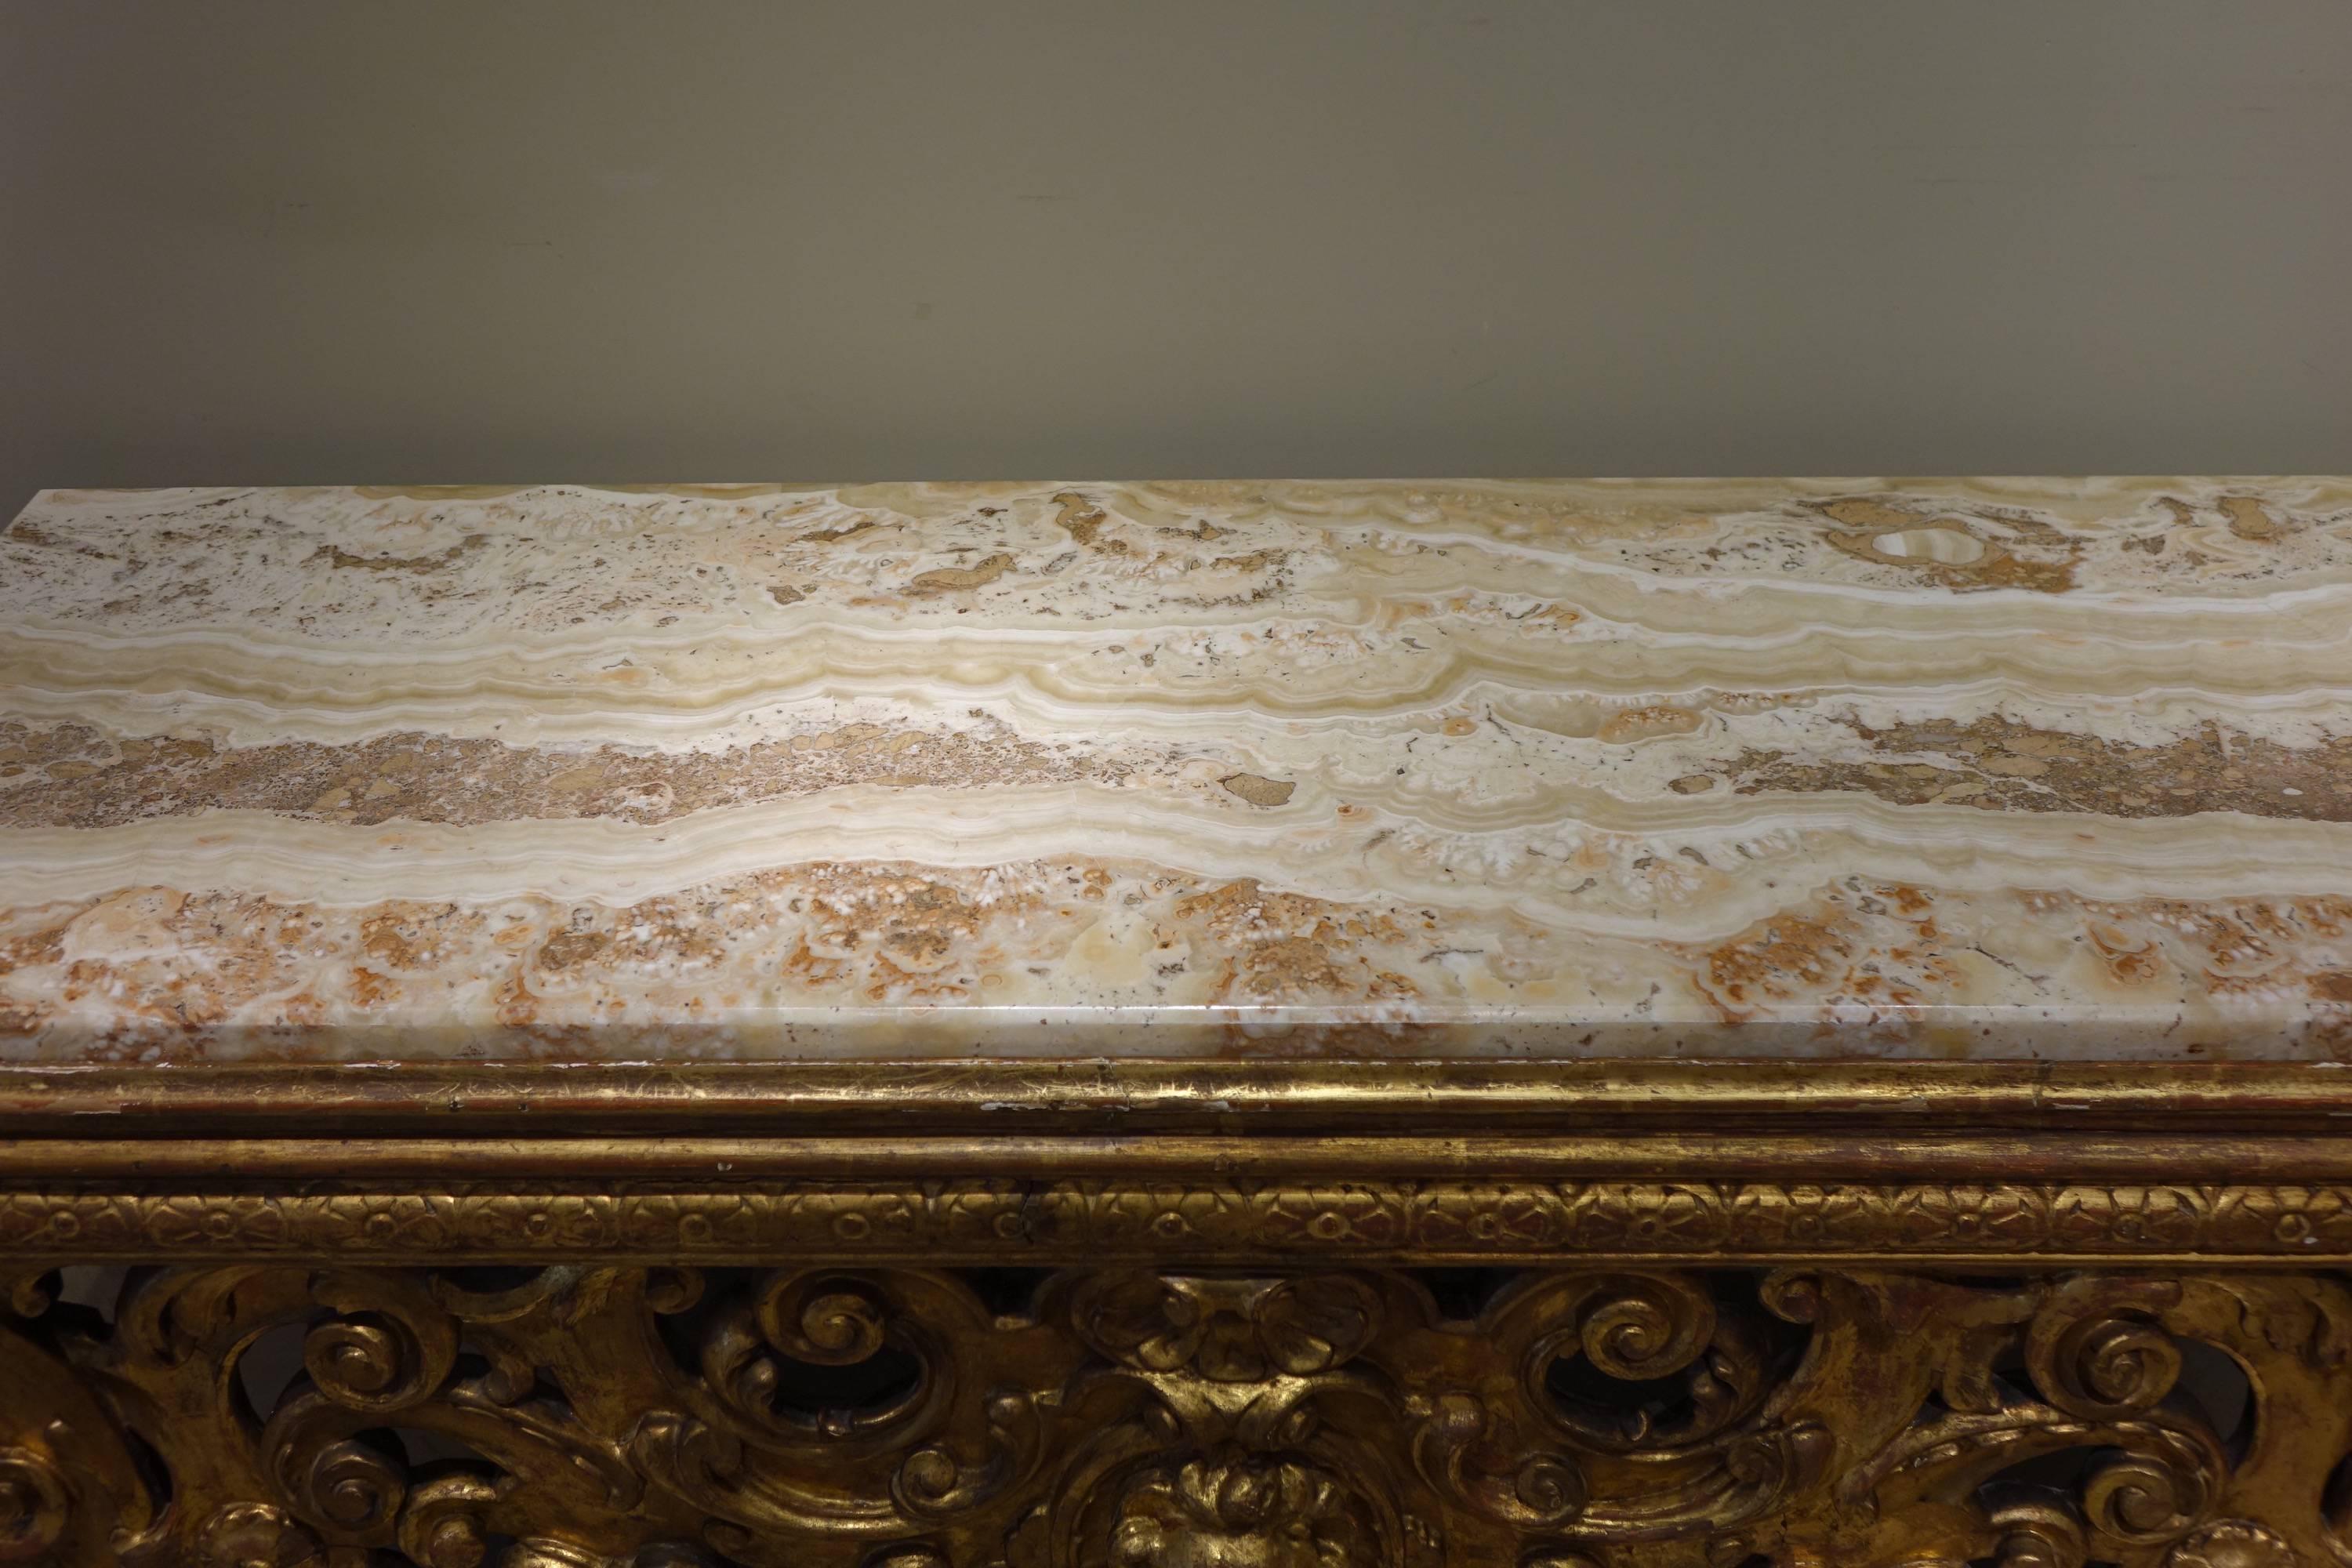 18th century Italian bench console formerly covered with fabric, replaced by an onyx slab, decorated with foliated scrolls, flower motifs and a lions head in its center.
The back is decorated with gilded wood with engravings. 
Probably Rome,